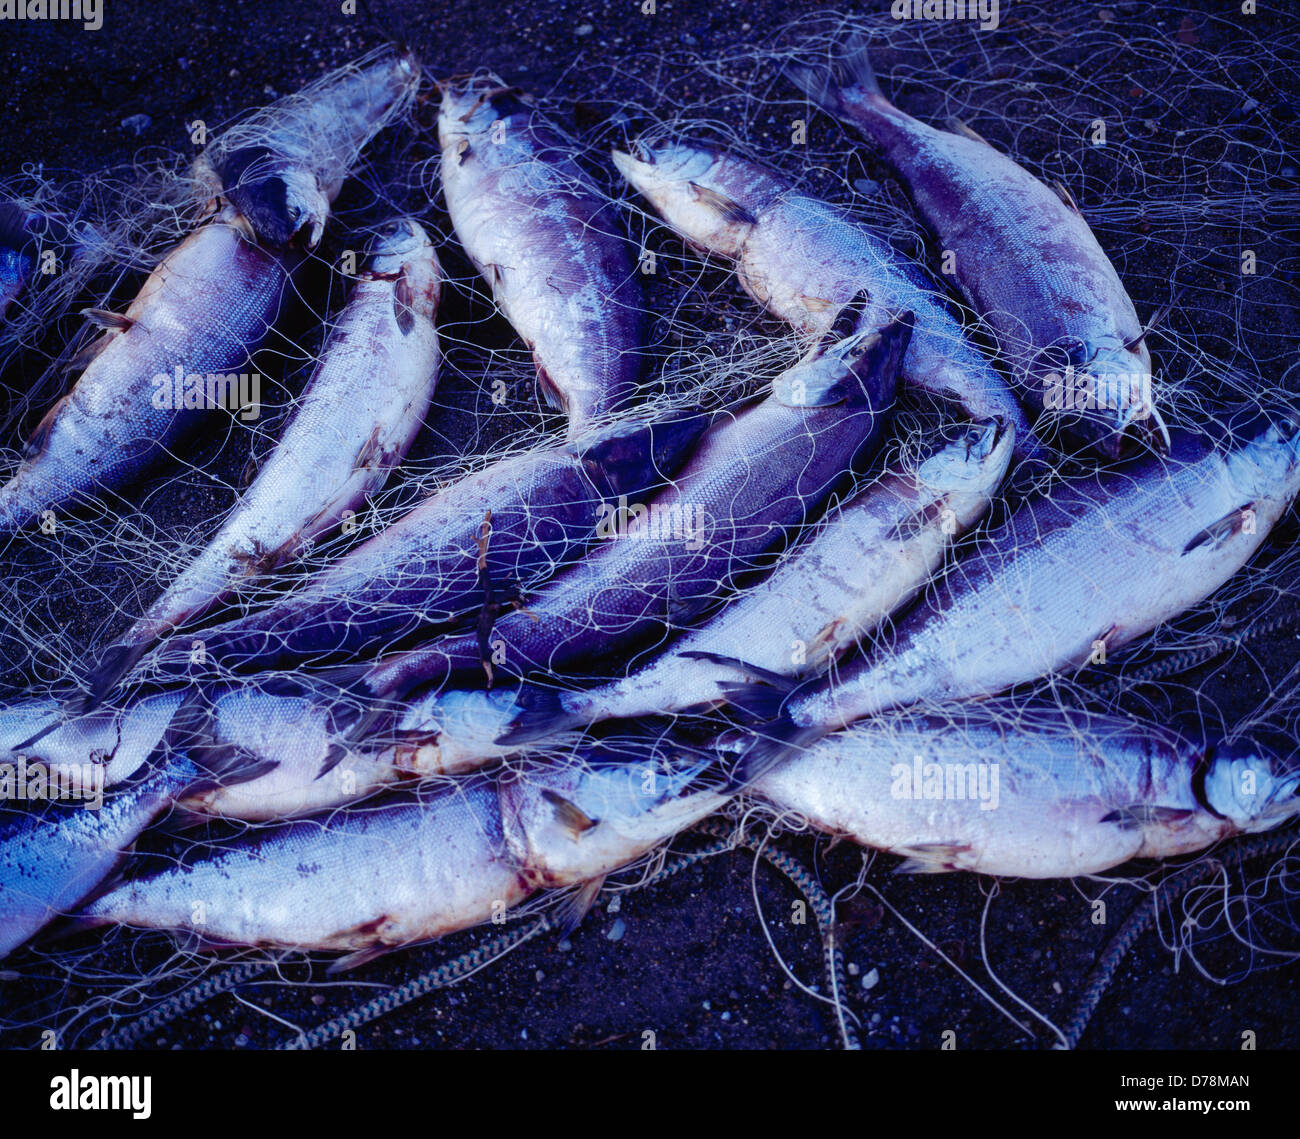 Wasted red or sockeye salmon in commercial fishing gill net either